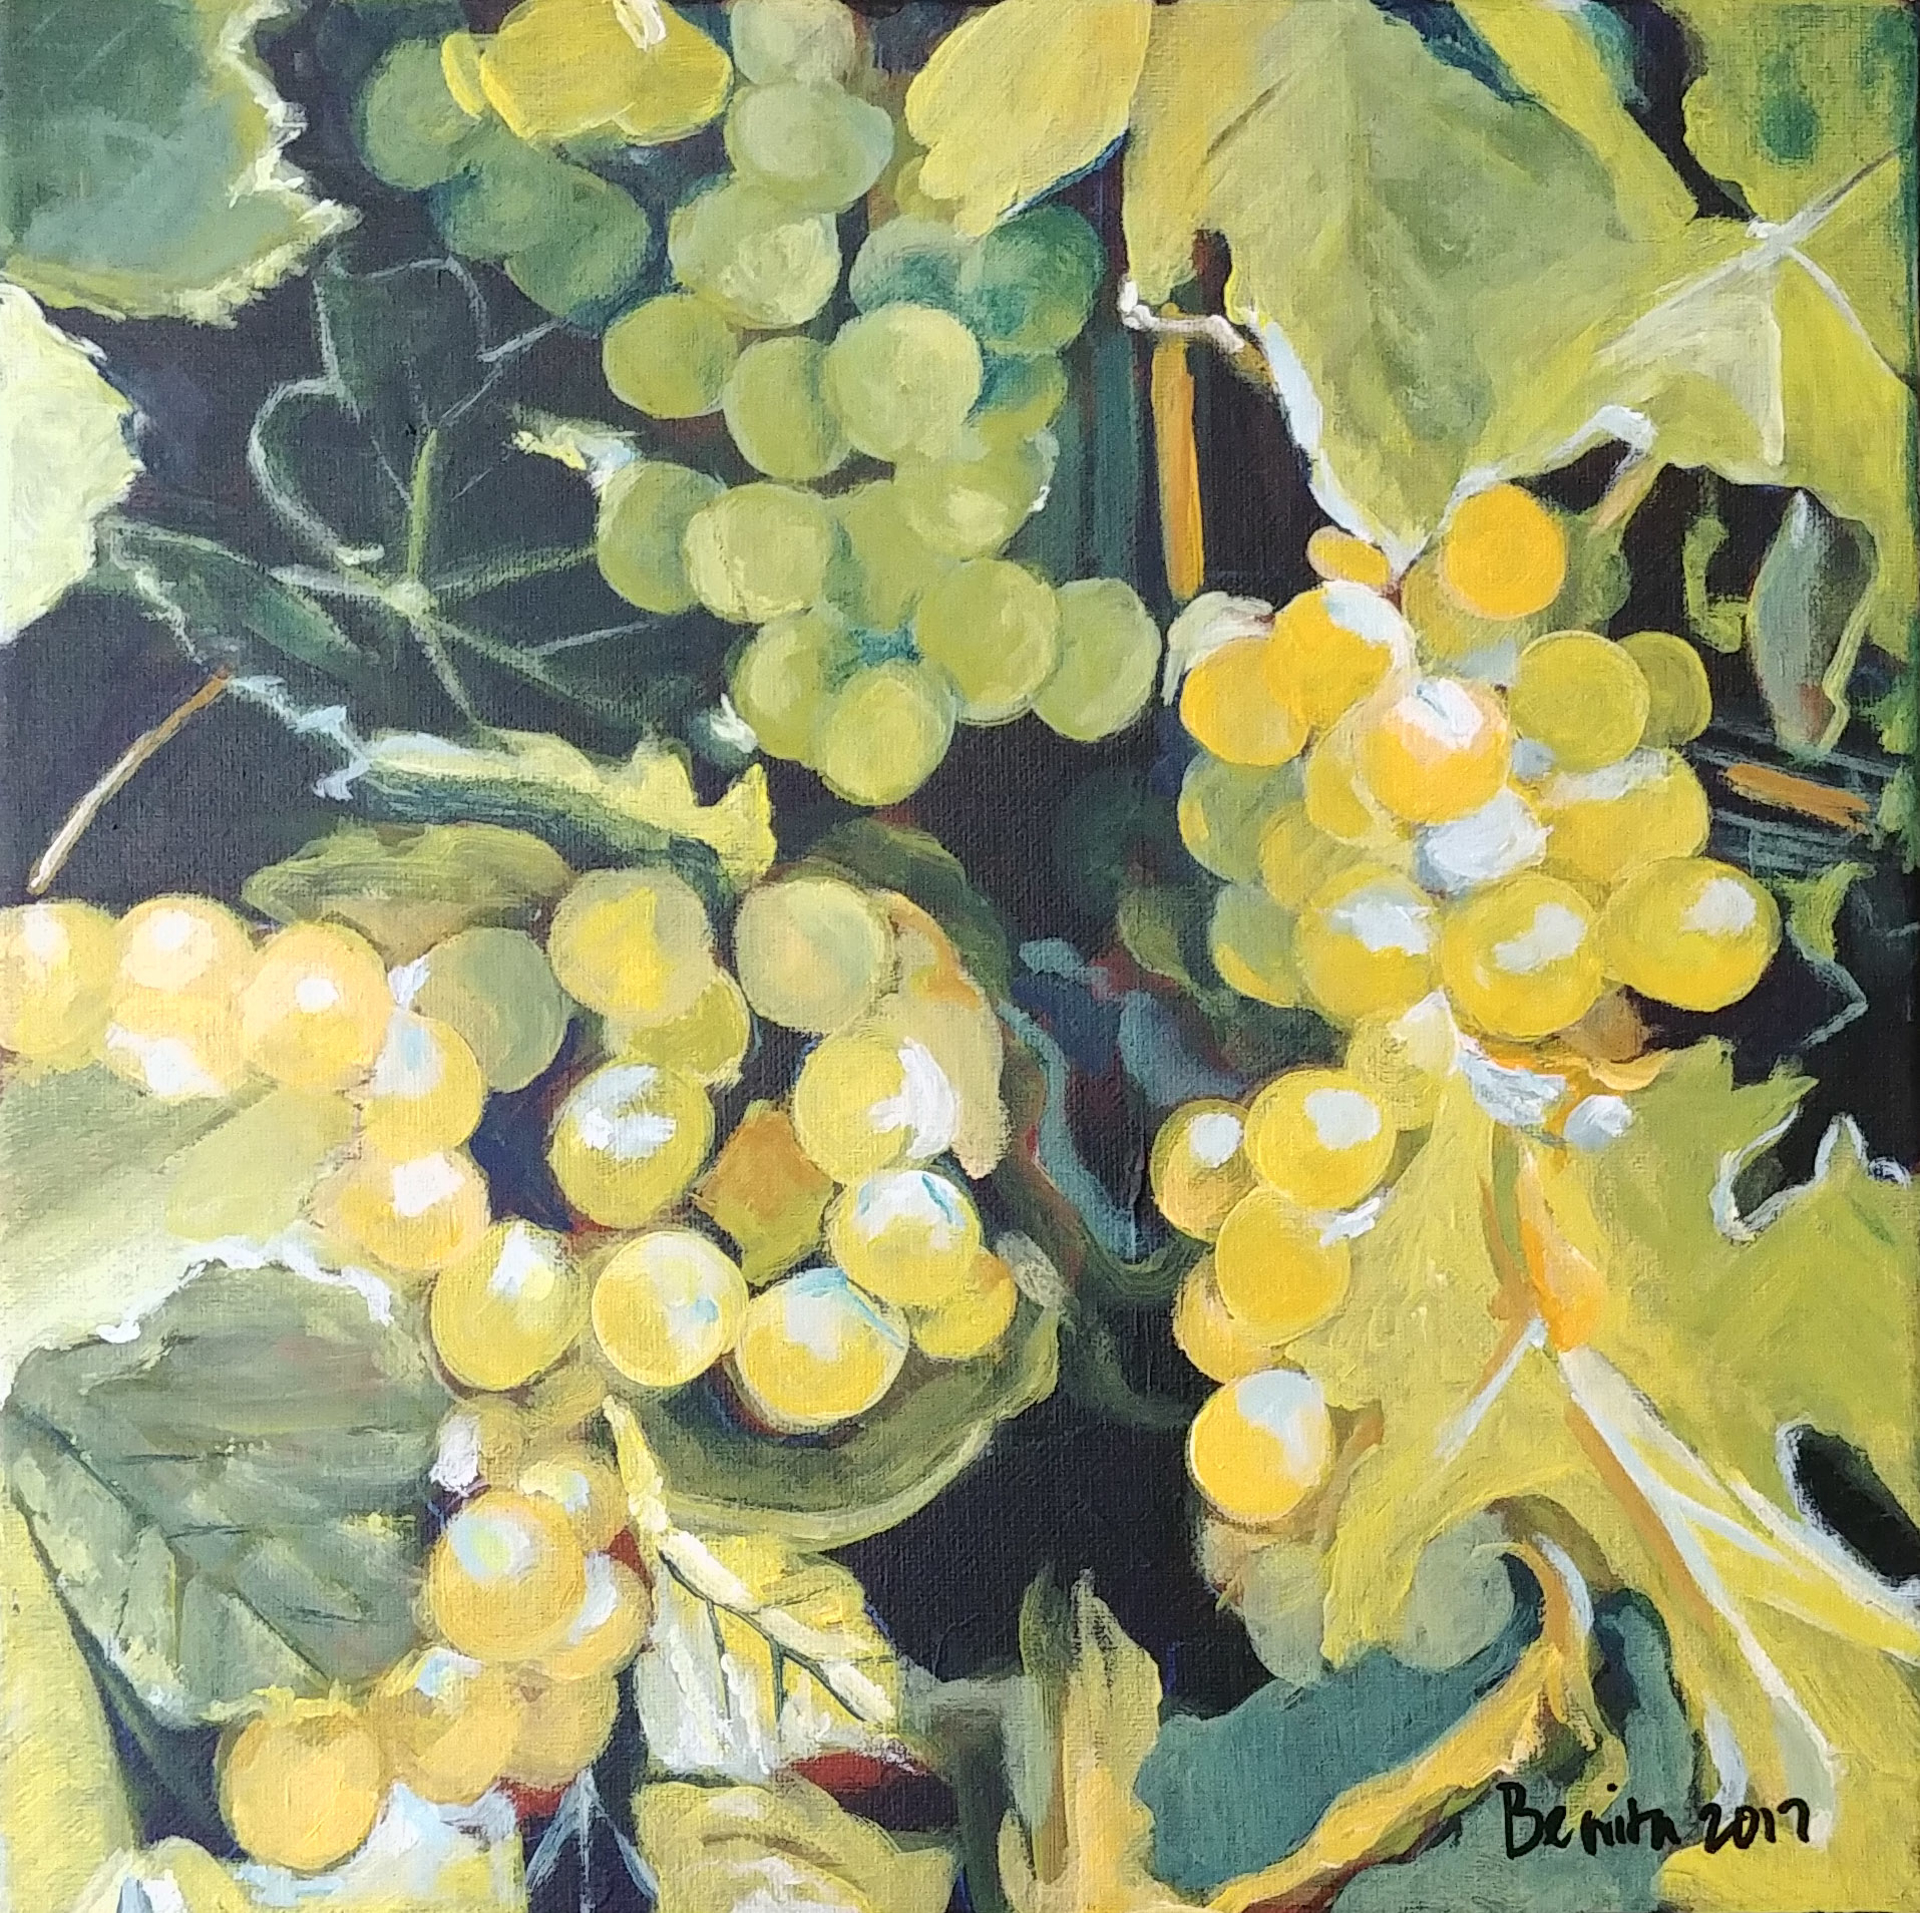 Grapes by Benita Cole (McMinnville, OR)